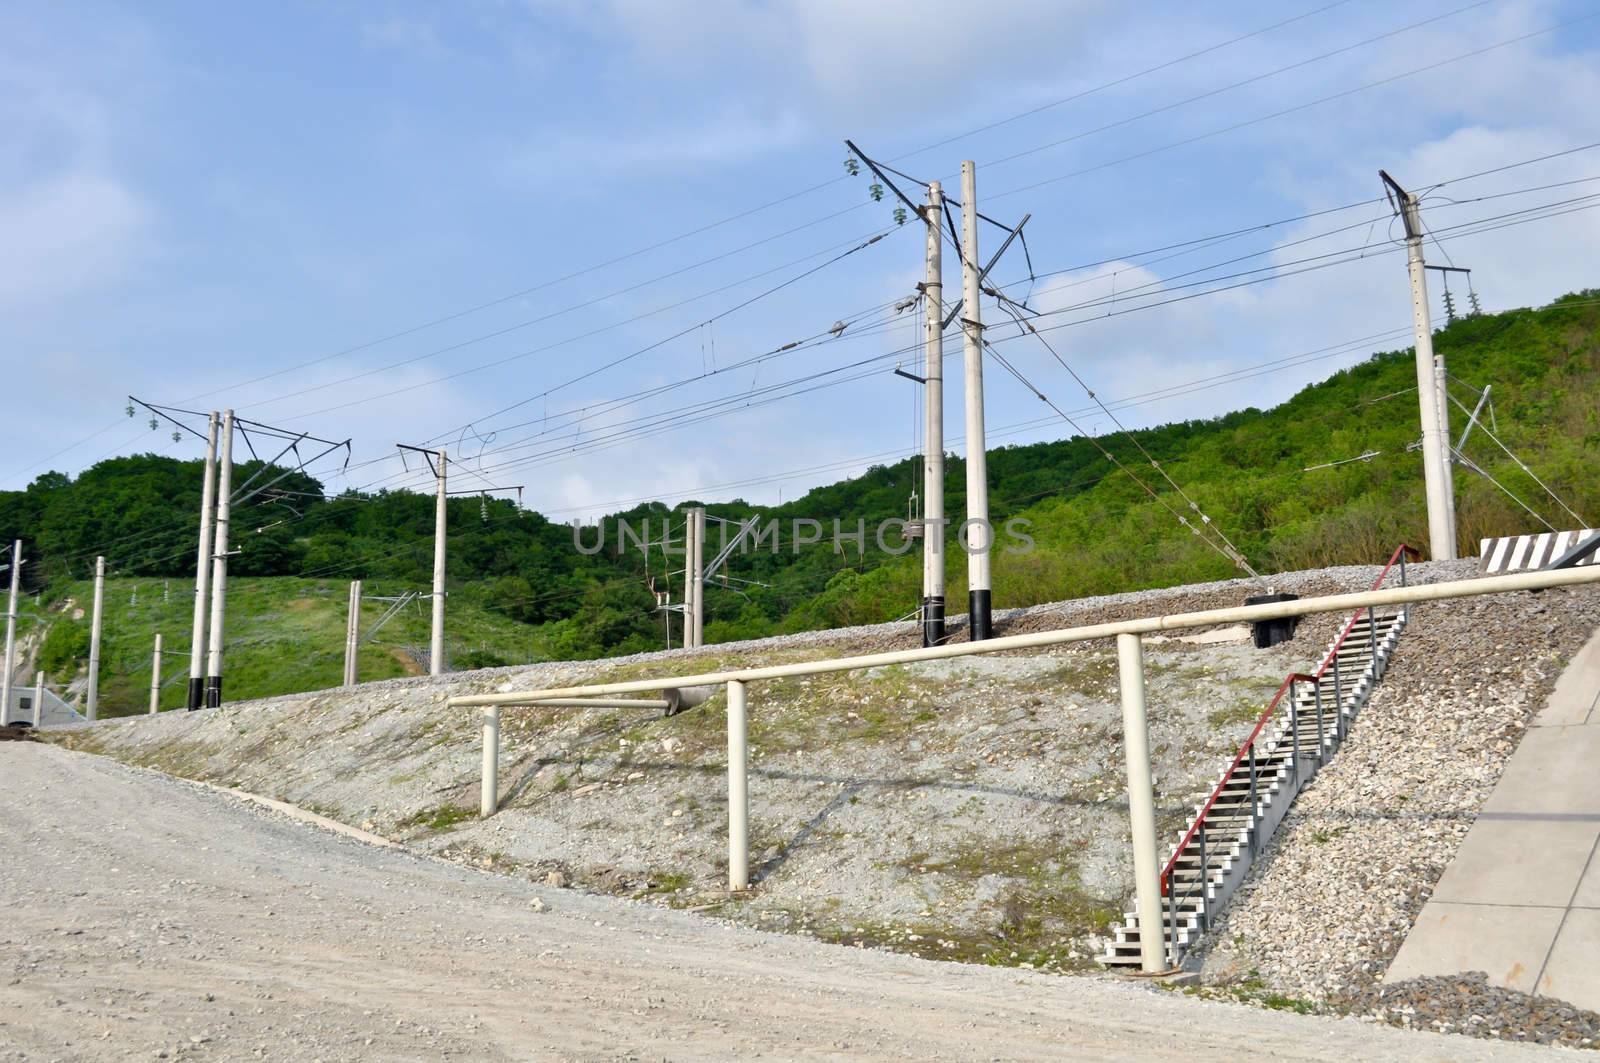 railroad track, embankment, and power poles